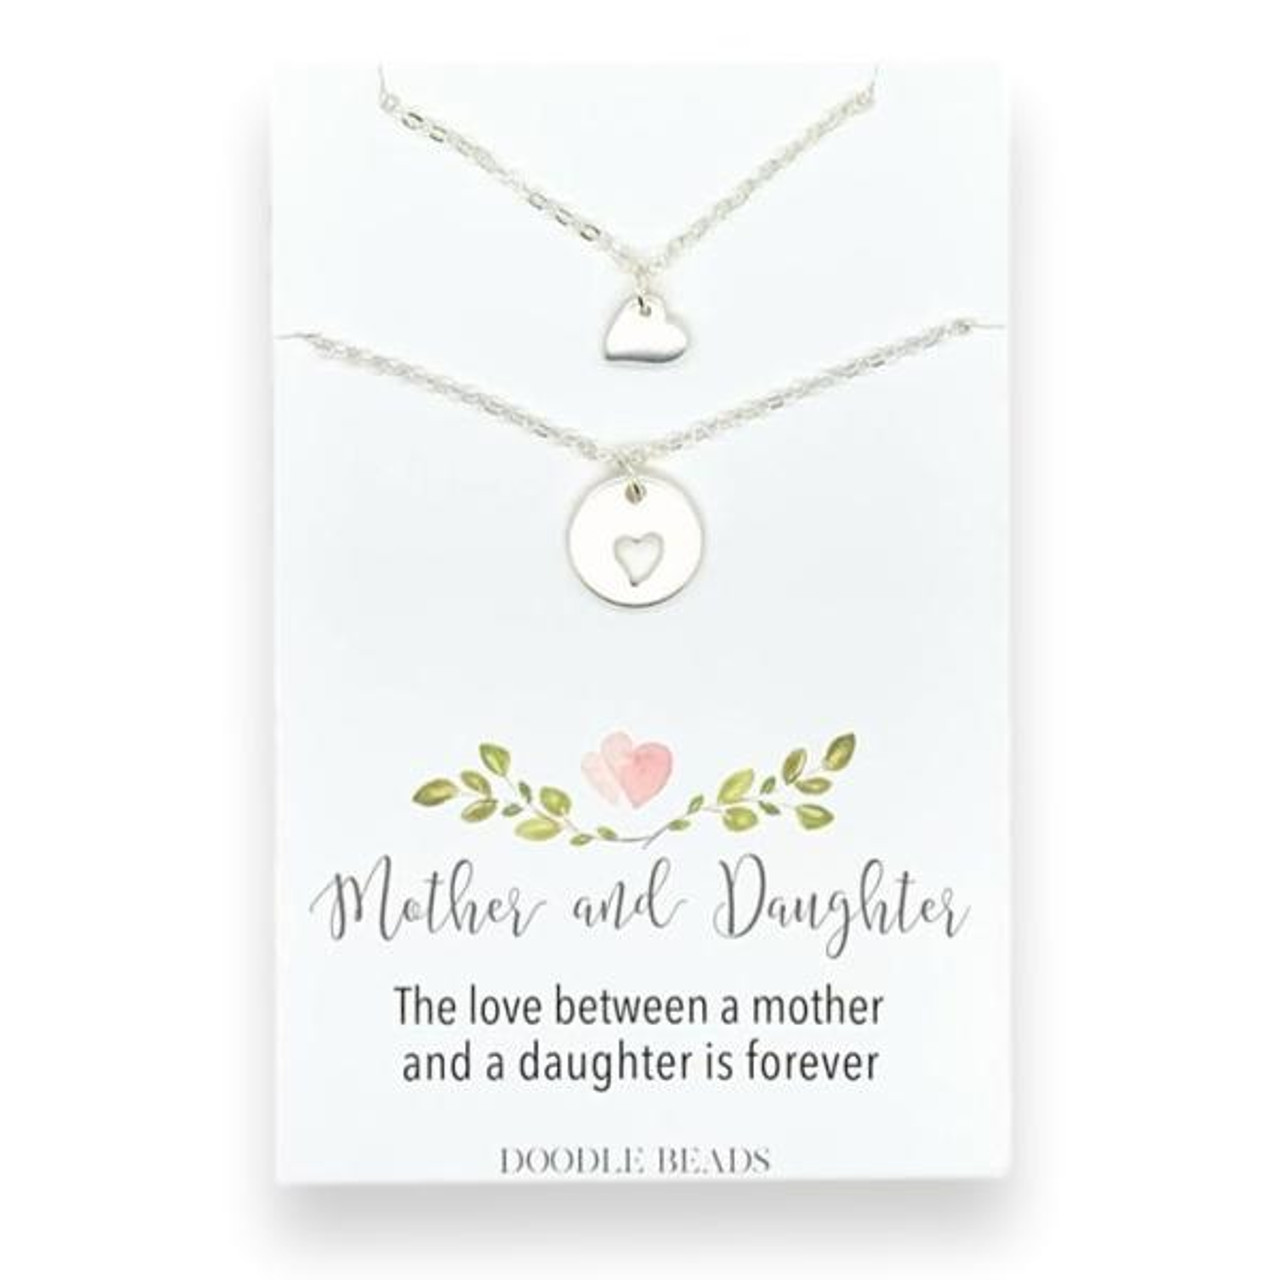 Mother Daughter Necklace Set, Tiny Hearts & Cut Out Heart Charm Necklace (Silver)